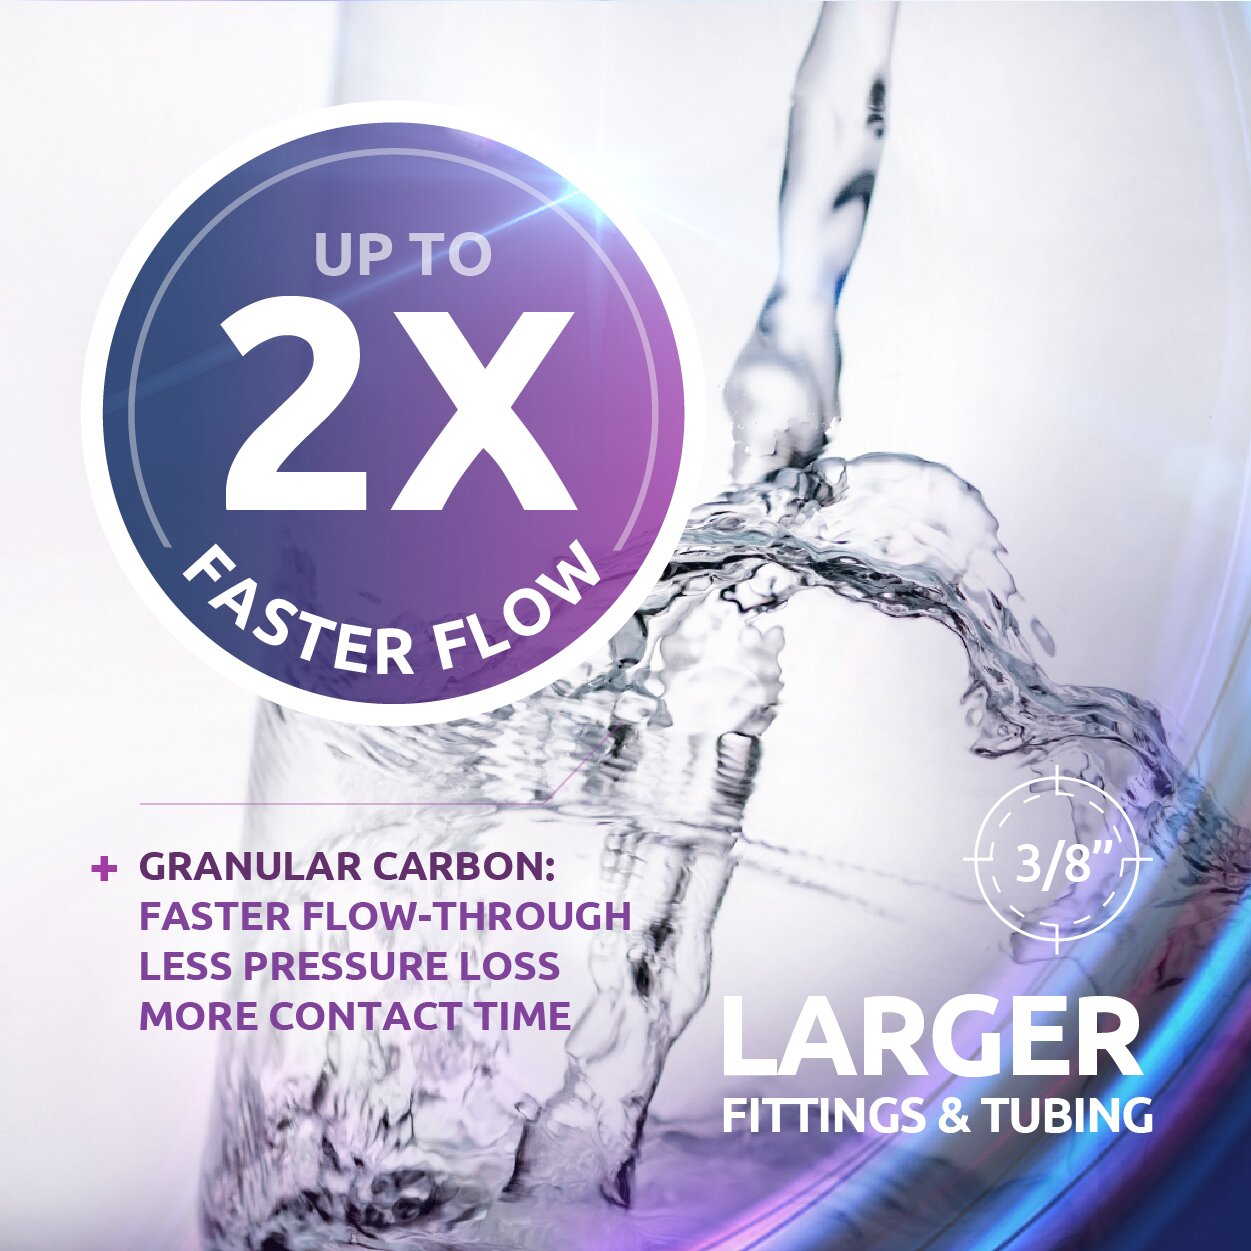 Up to 2x Faster Flow